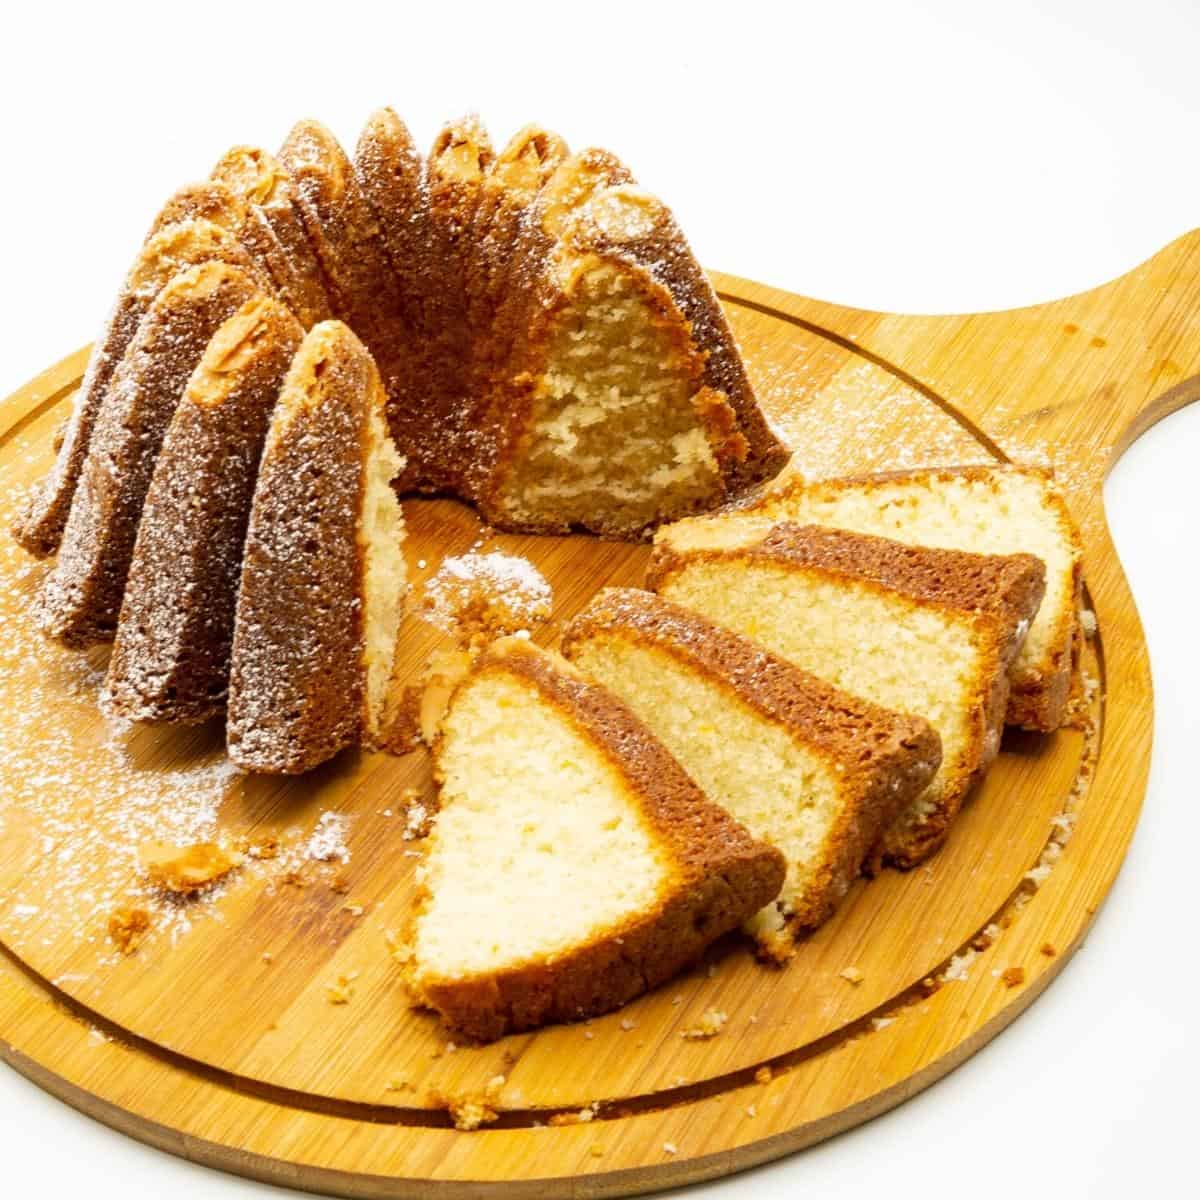 Marzipan bundt cake slices on a table.